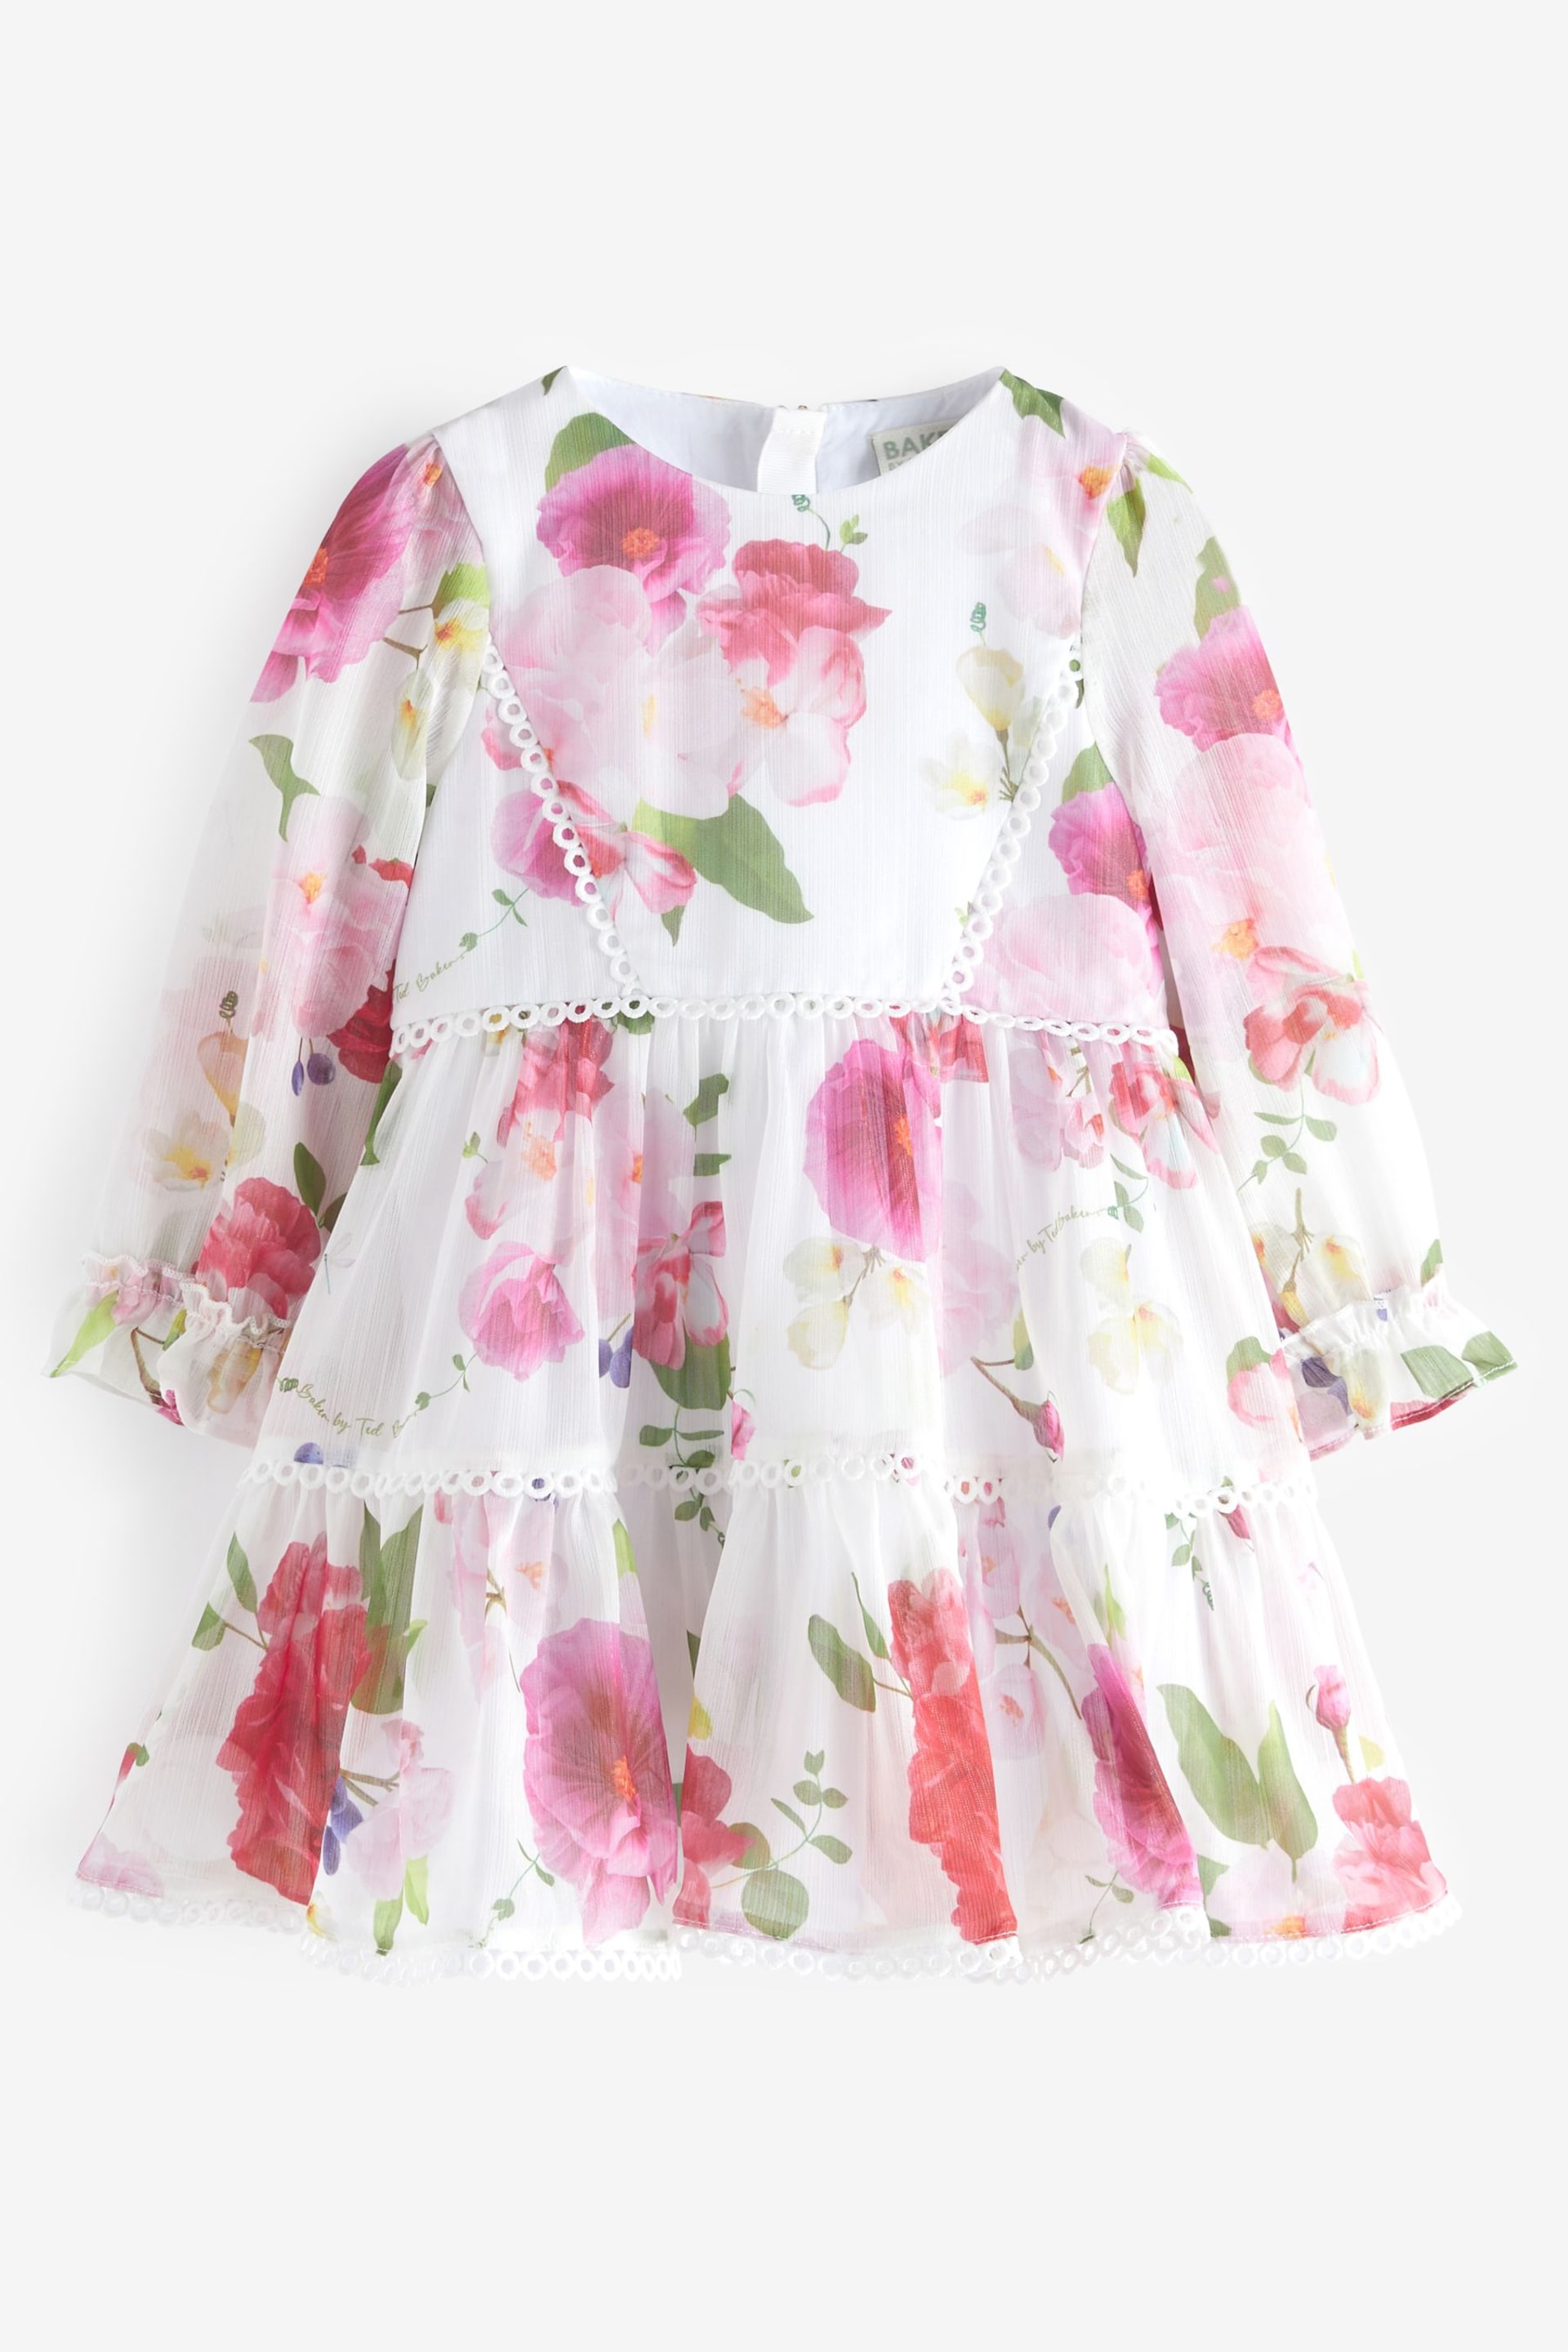 Baker by Ted Baker Floral Lace Dress - Image 5 of 9